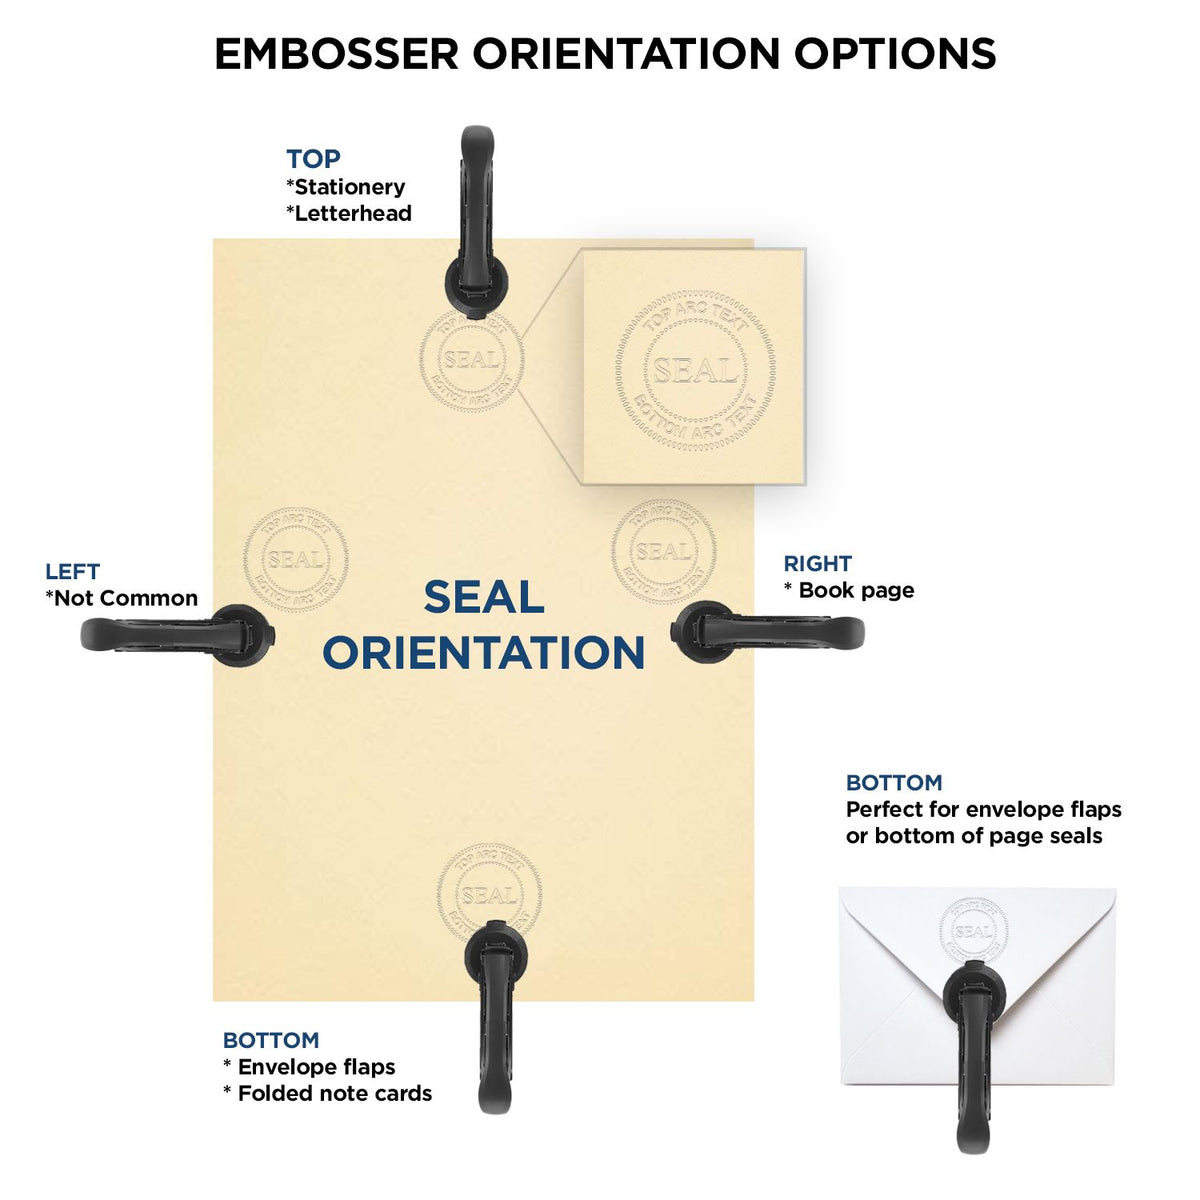 An infographic for the Handheld Missouri Professional Engineer Embosser showing embosser orientation, this is showing examples of a top, bottom, right and left insert.